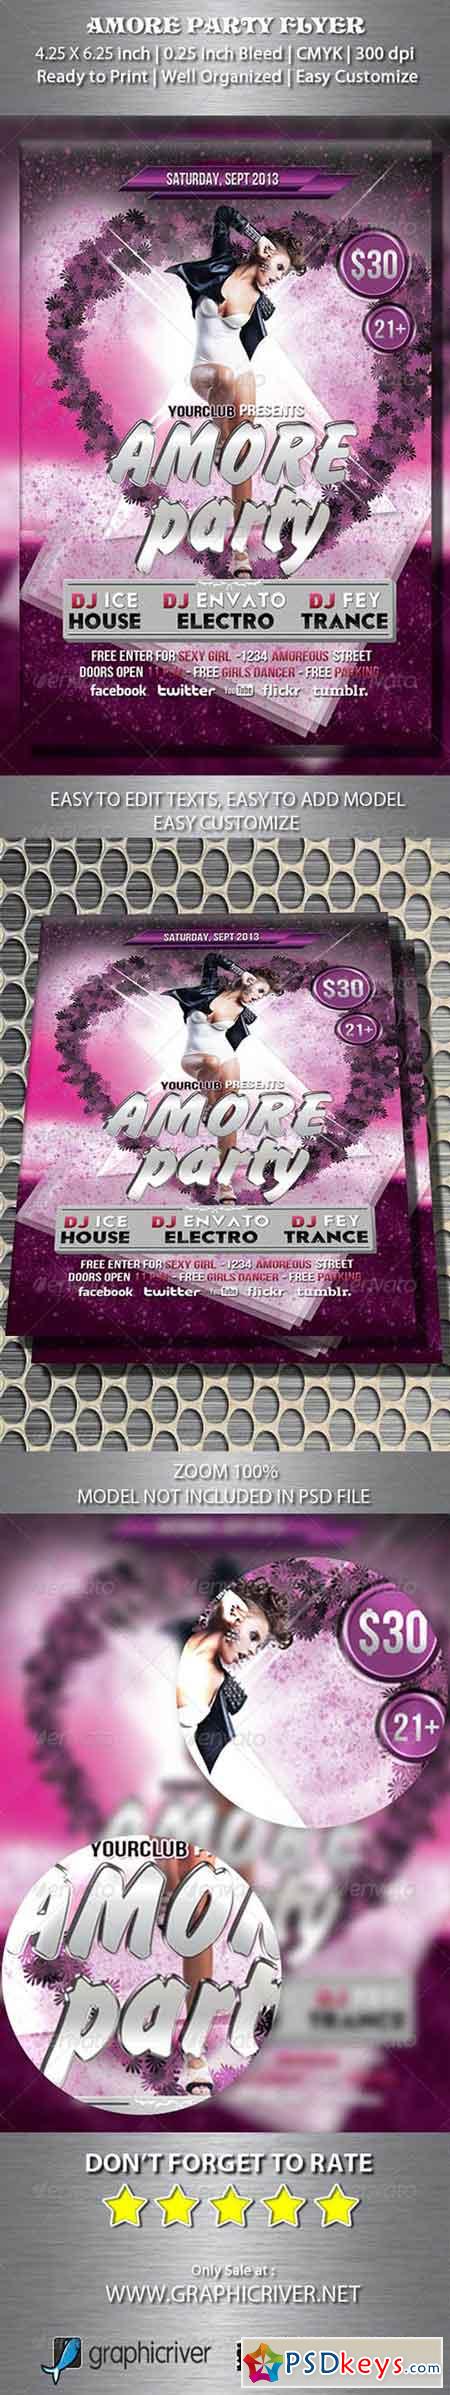 Amore Party Flyer 5365824